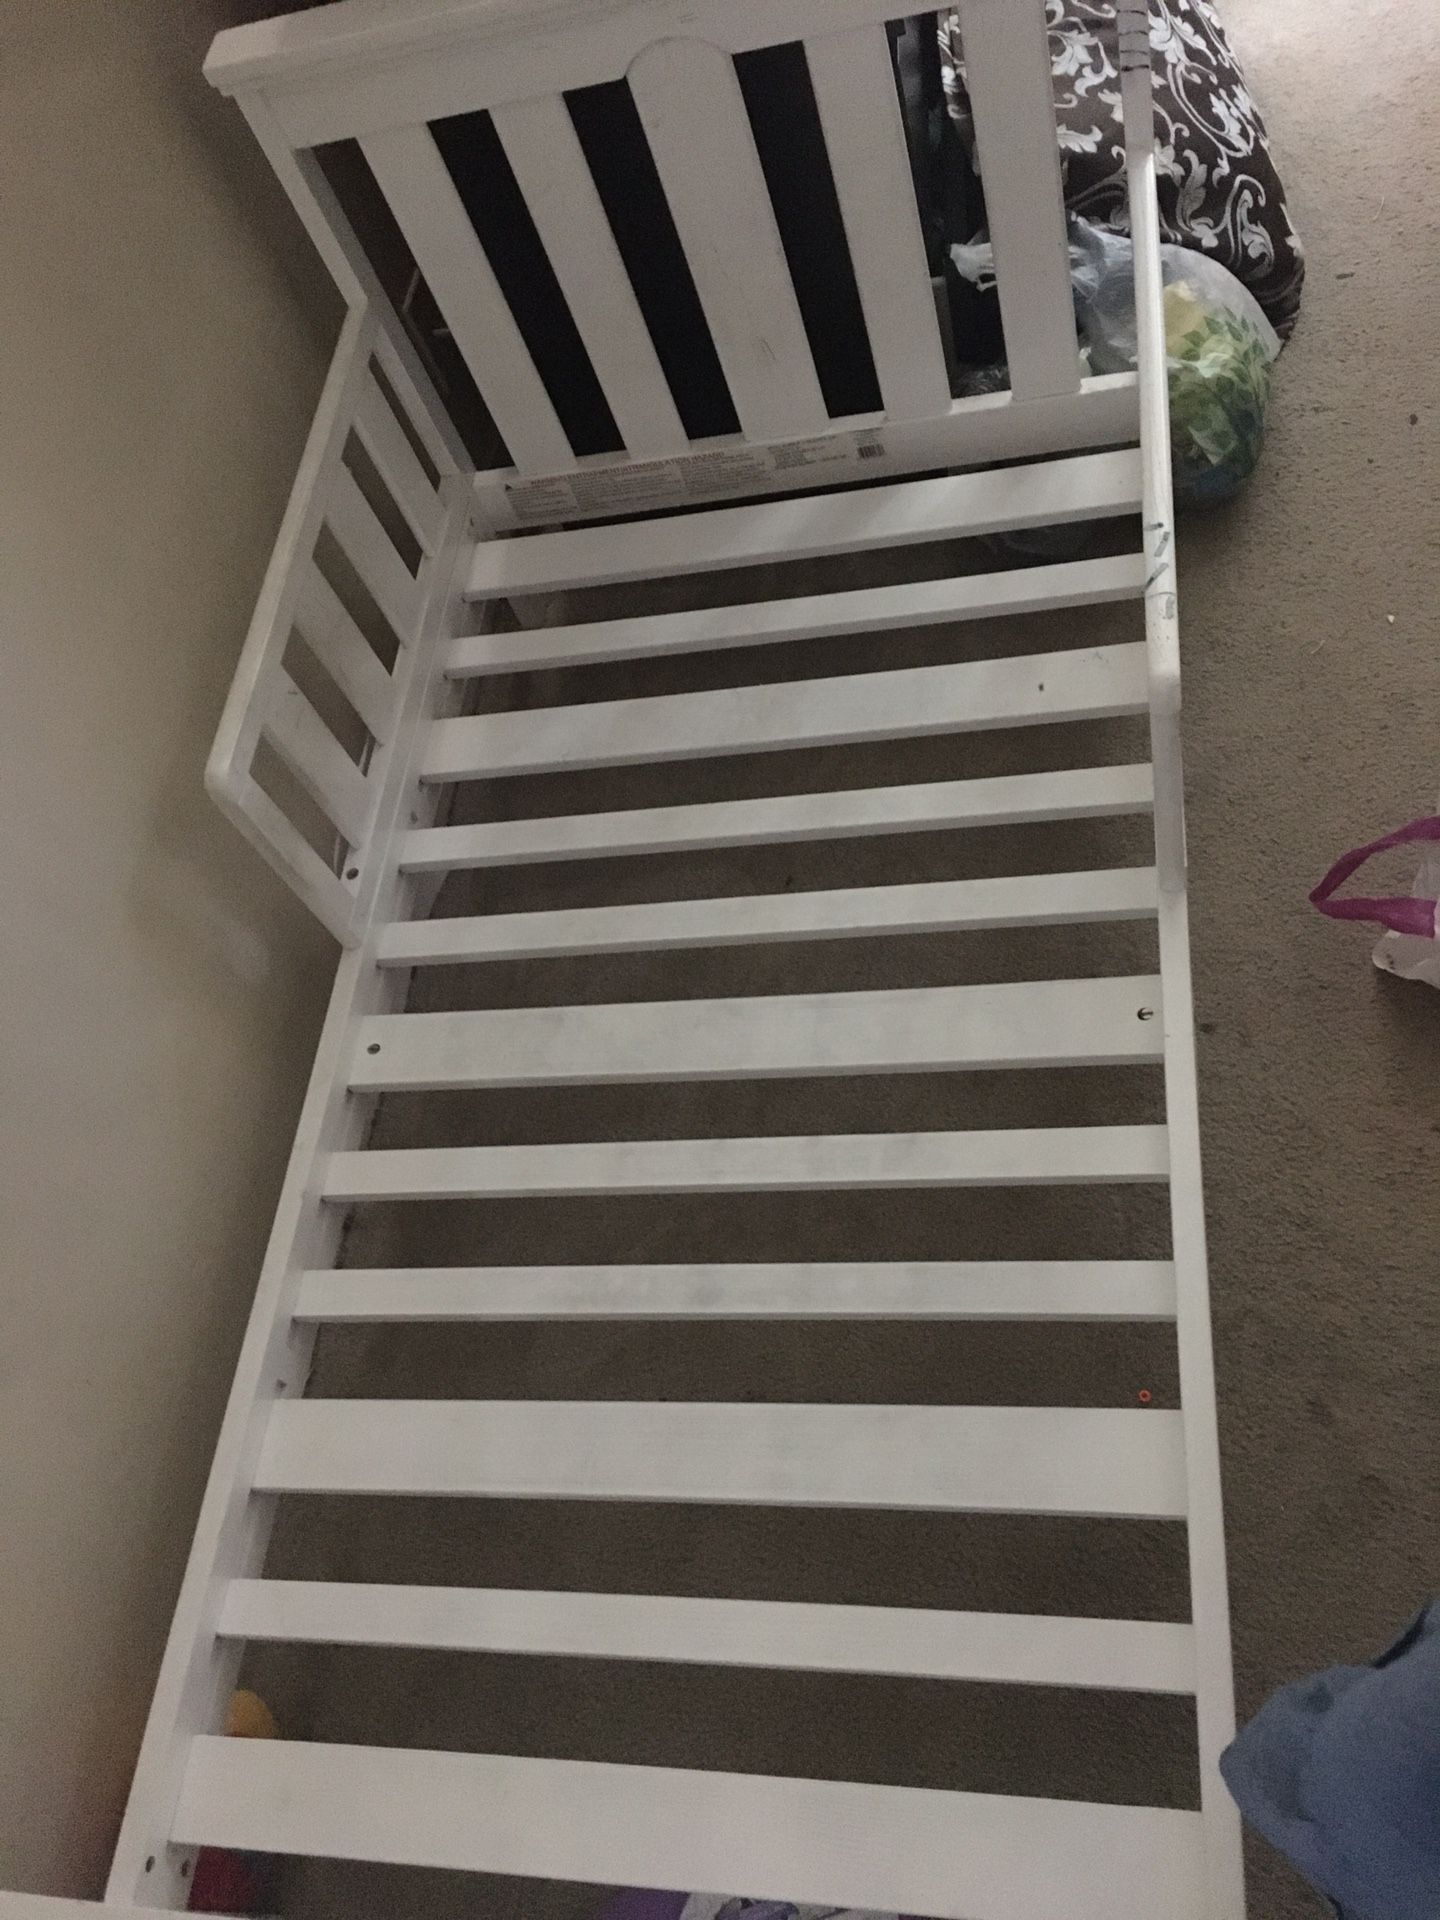 Kids Bed With Mattress 